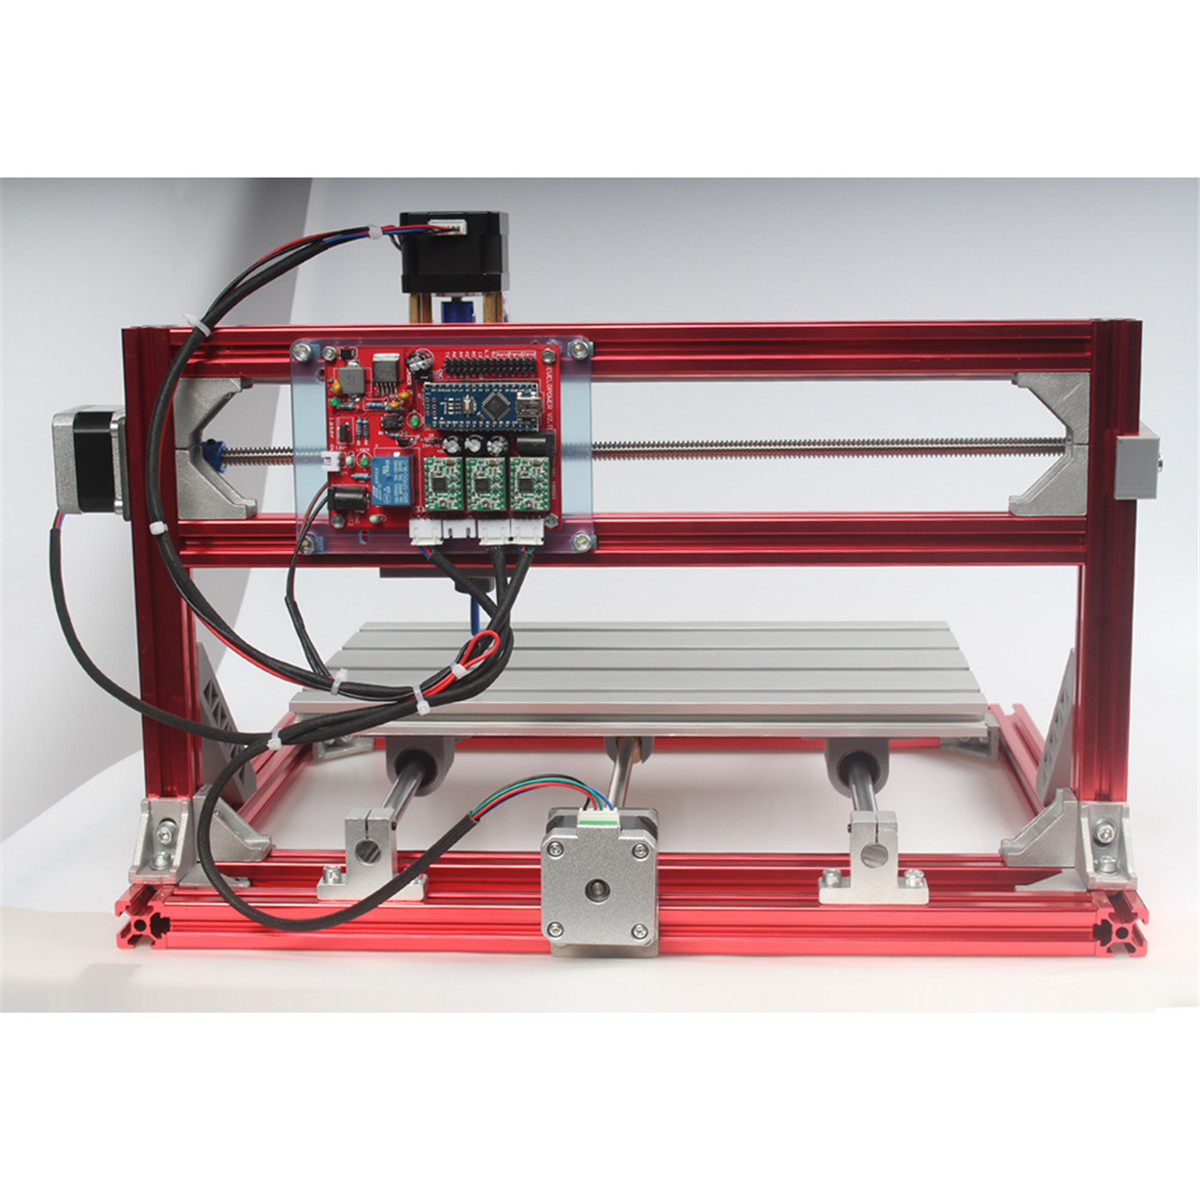 3018-3-Axis-Red-CNC-Wood-Engraving-Carving-PCB-Milling-Machine-Router-Engraver-GRBLControl-1412004